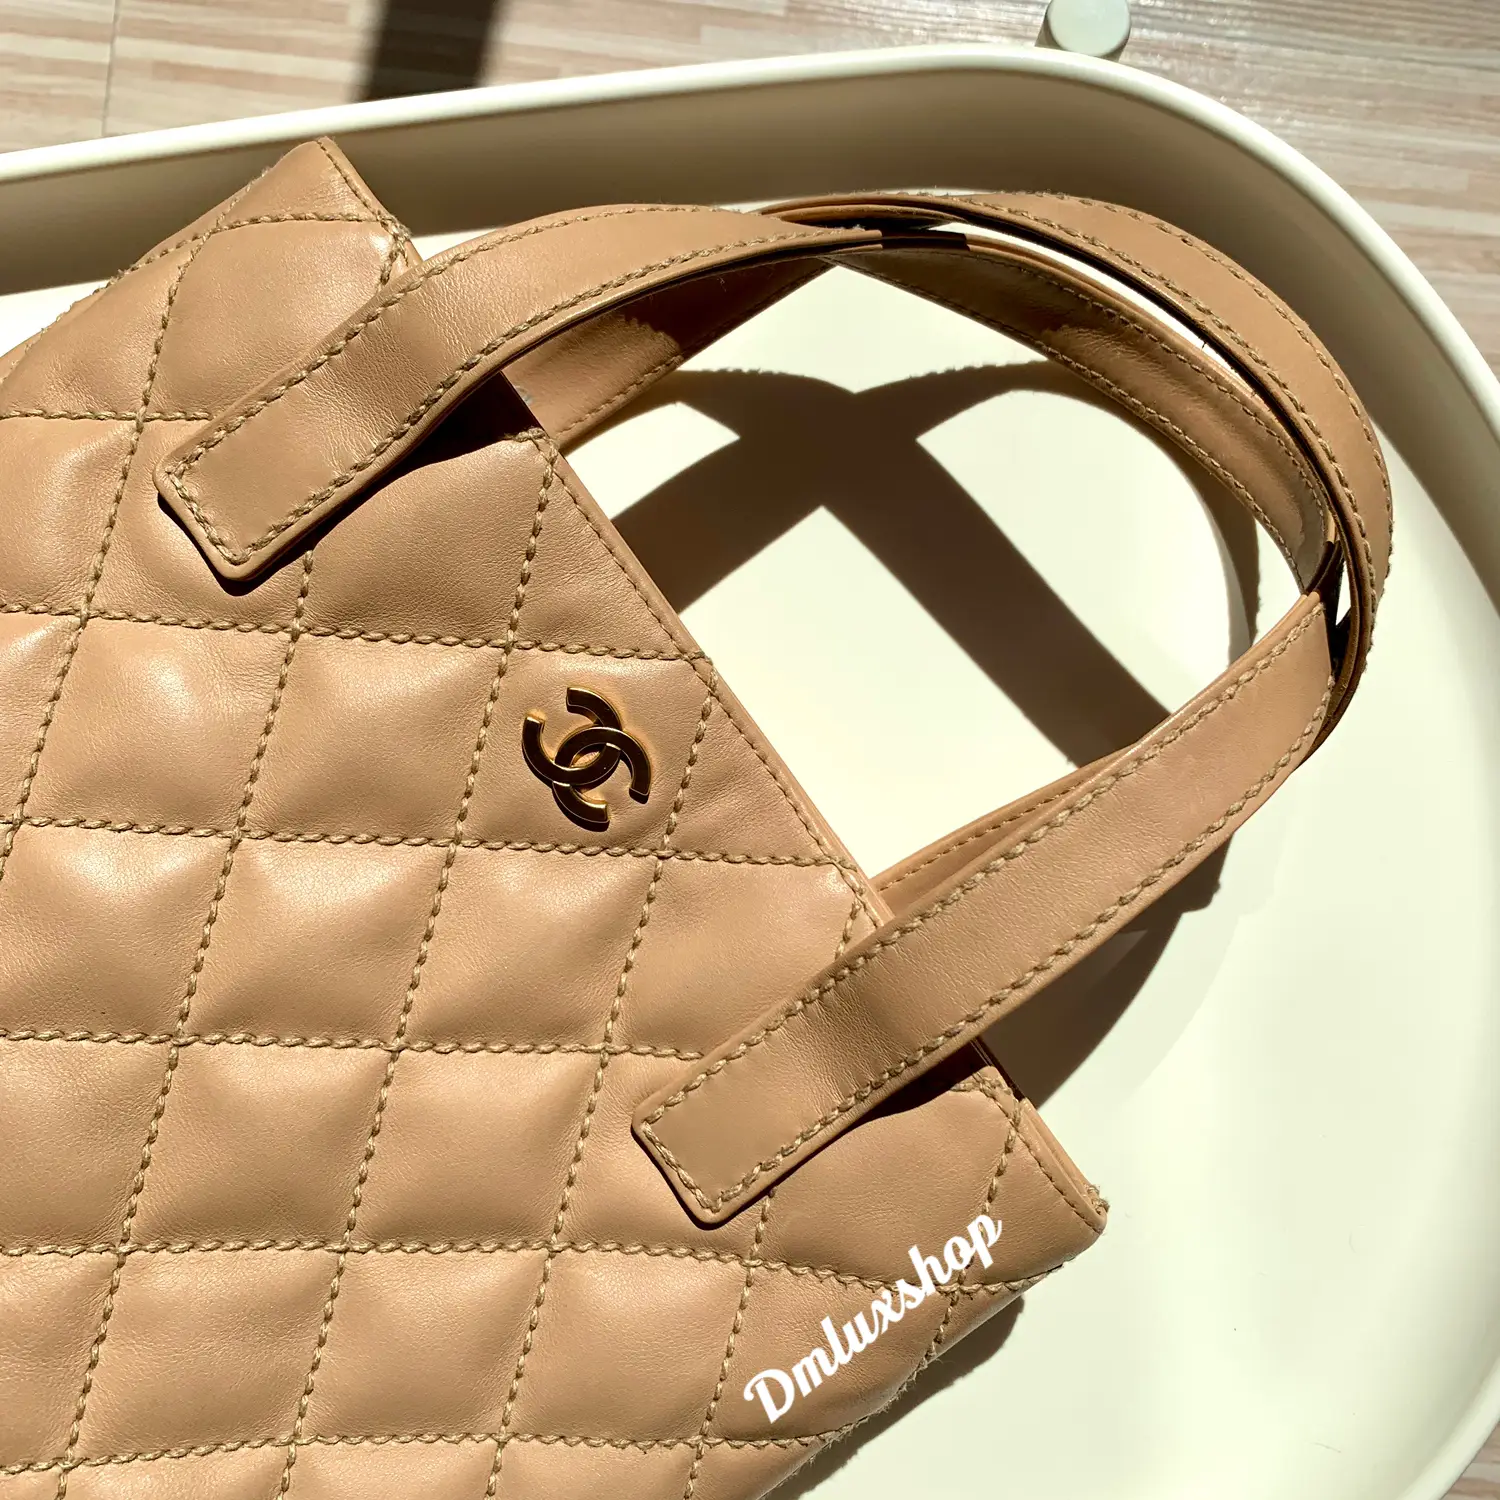 🇲🇾Chanel Beige Wild Stitch Tote🤎, Gallery posted by DM Luxshop